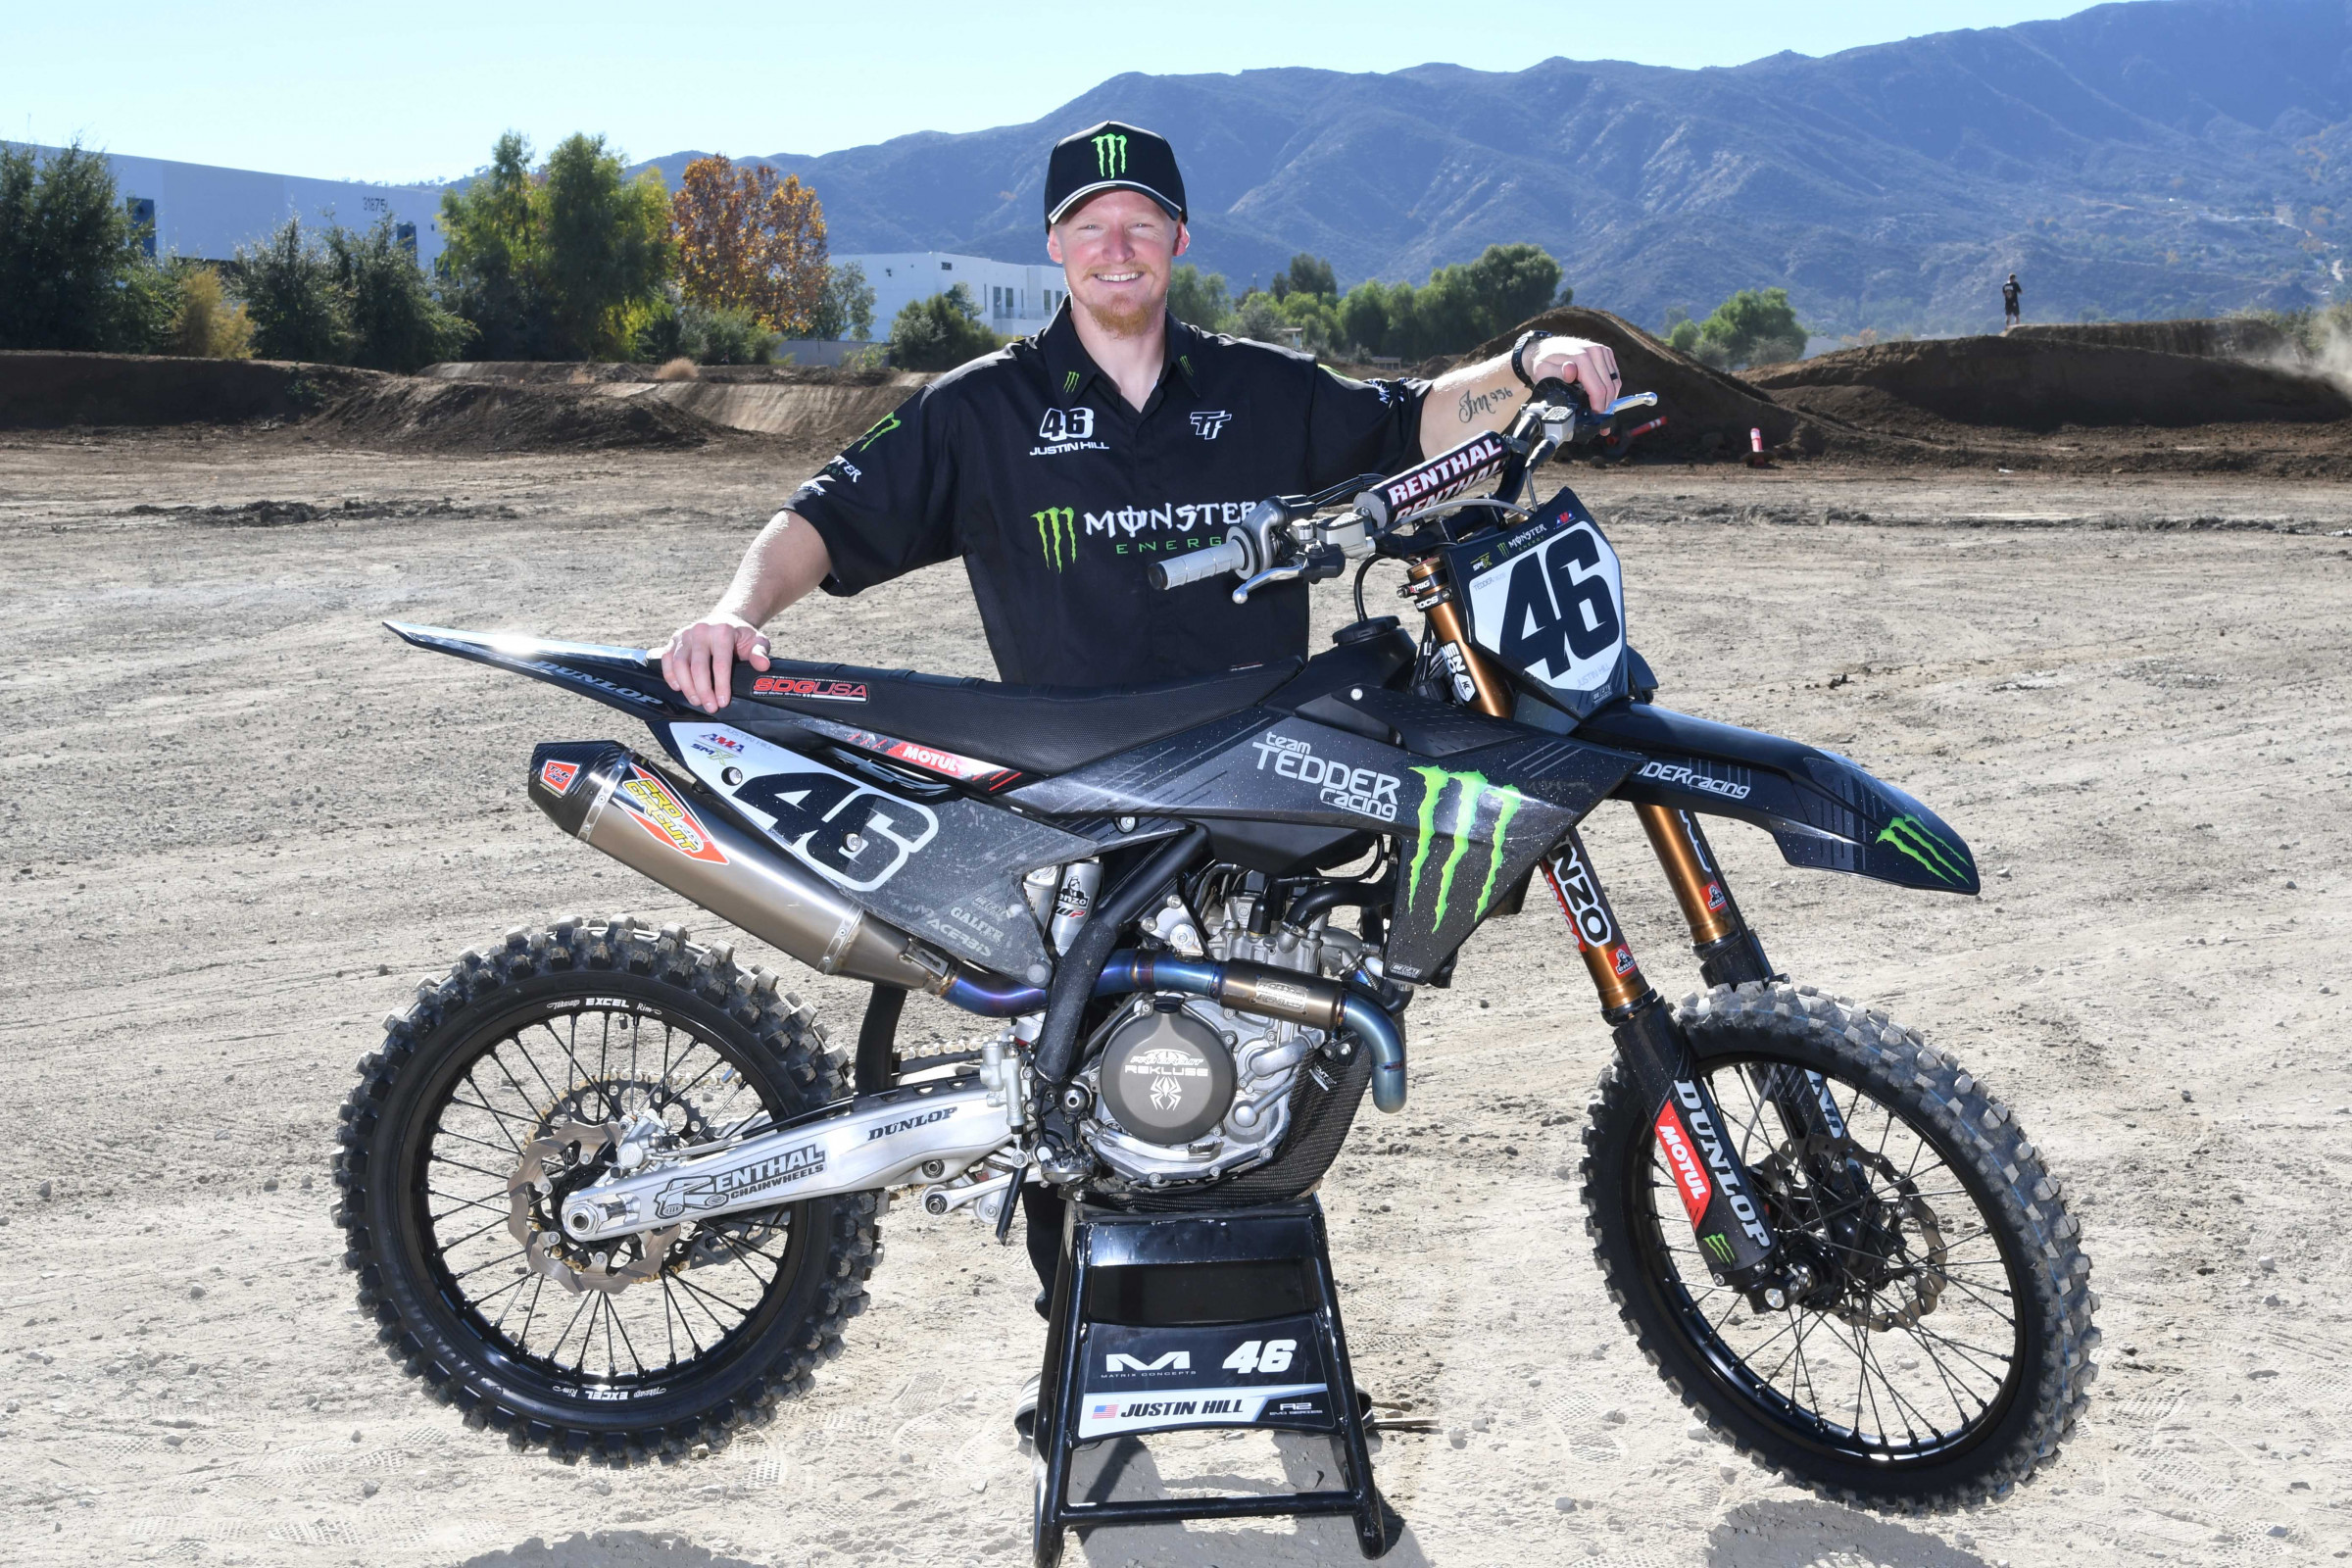 Introducing the Muc-Off FXR ClubMX Supercross Team